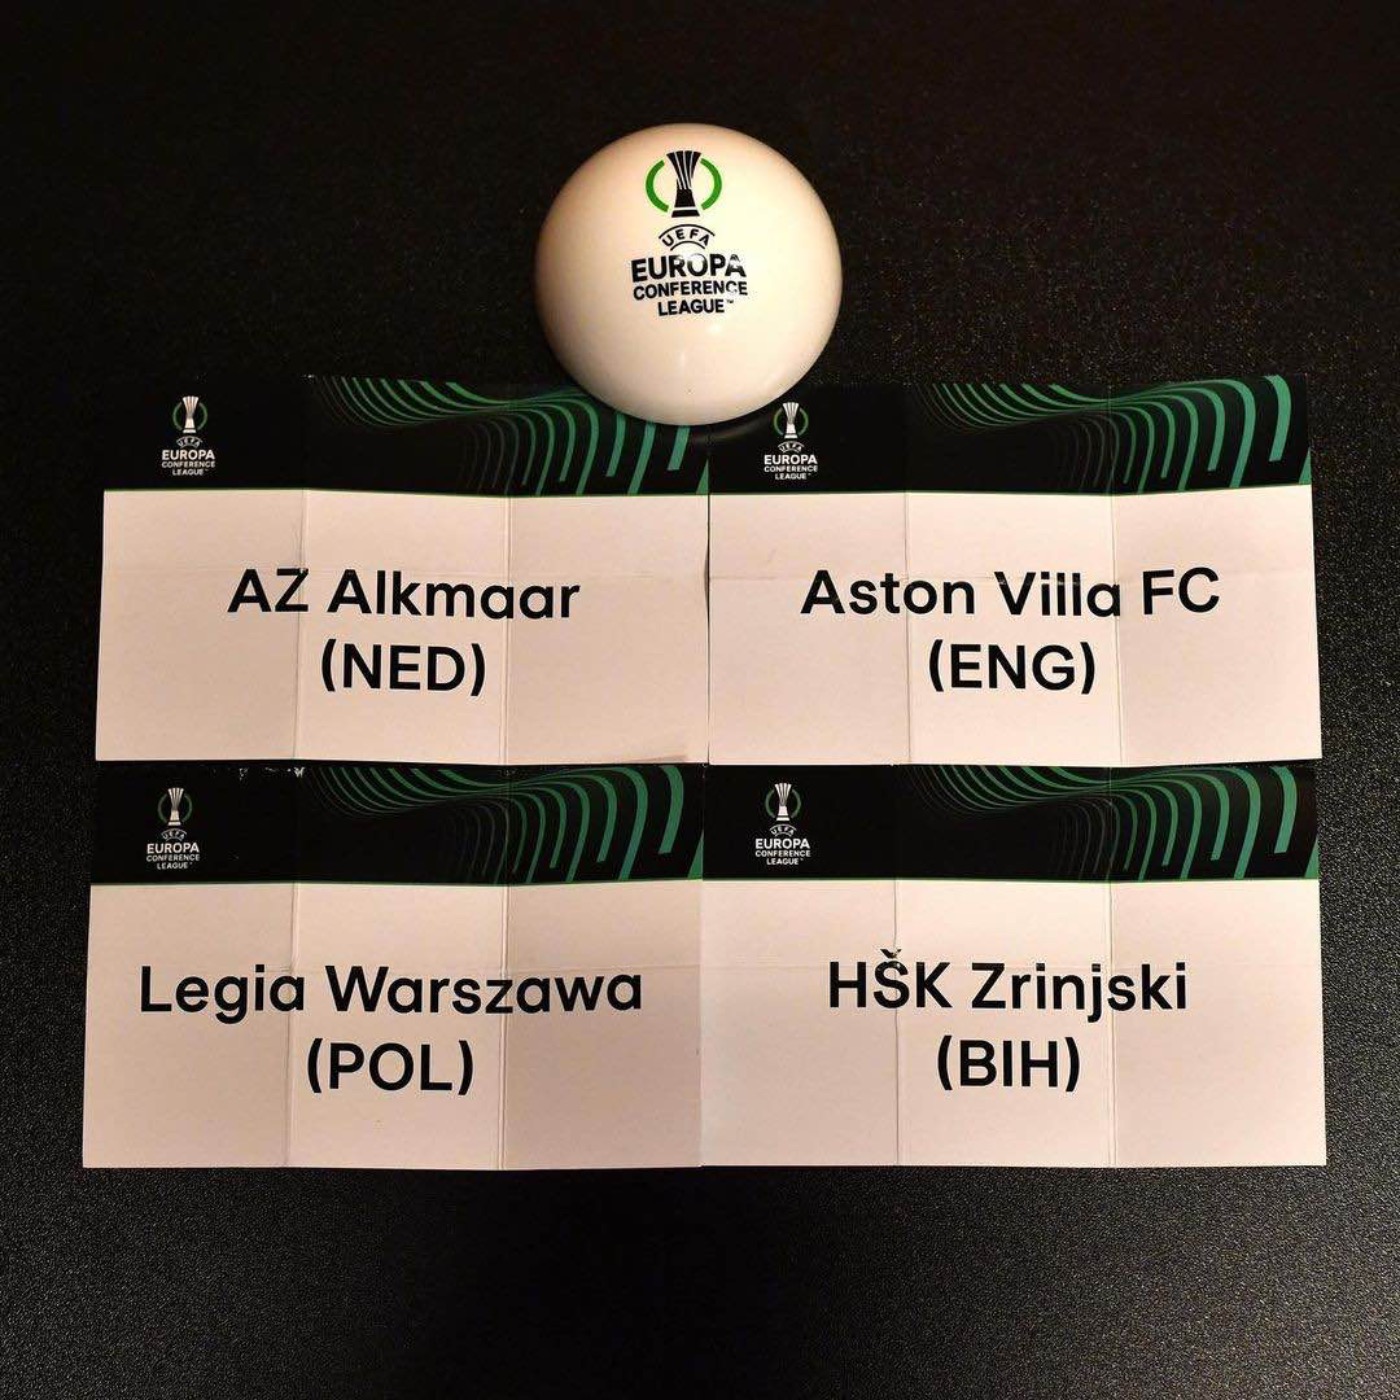 Europavision - The Group Stage and Rest of the Draw Assessed